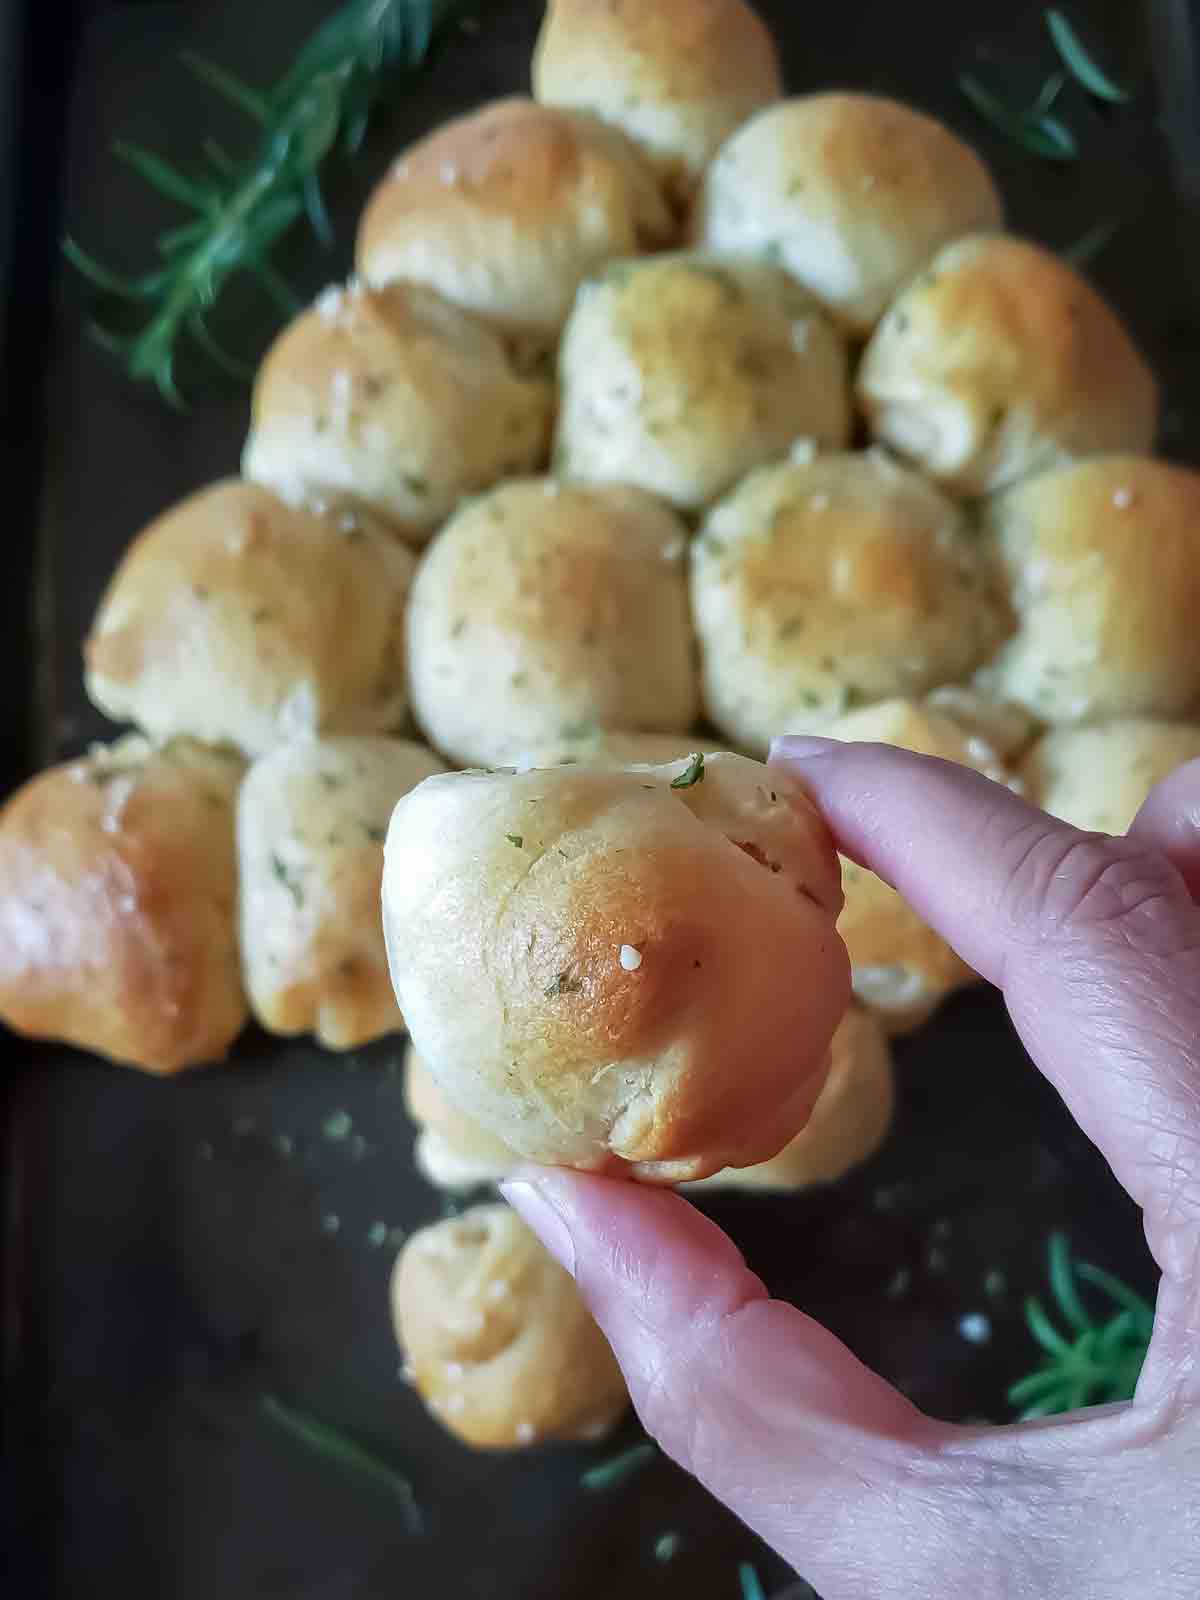 A hand holding pull apart garlic bread from the Christmas Tree Appetizer.